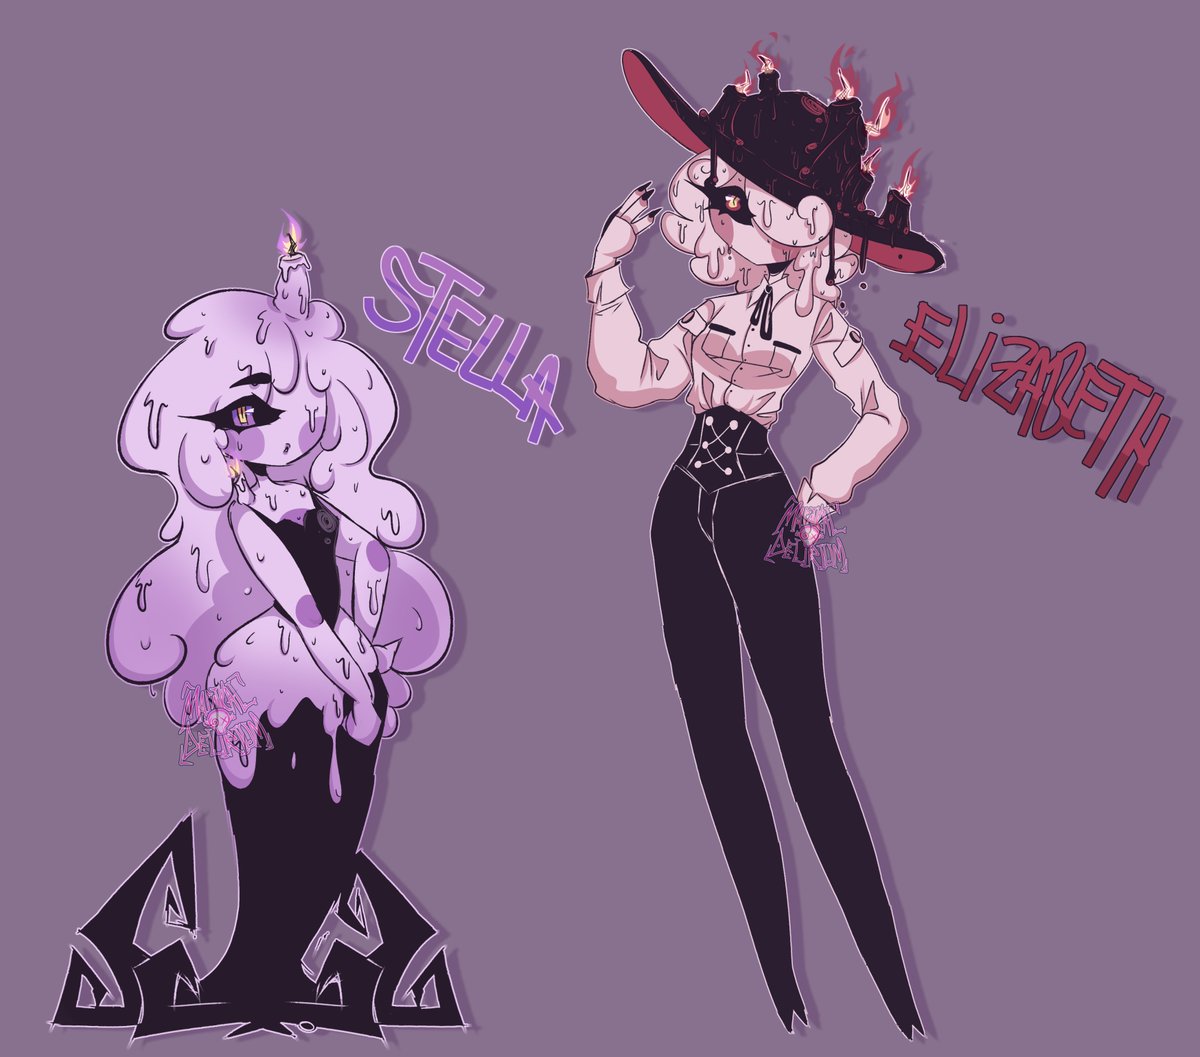 Some silly Candle girl desings :))